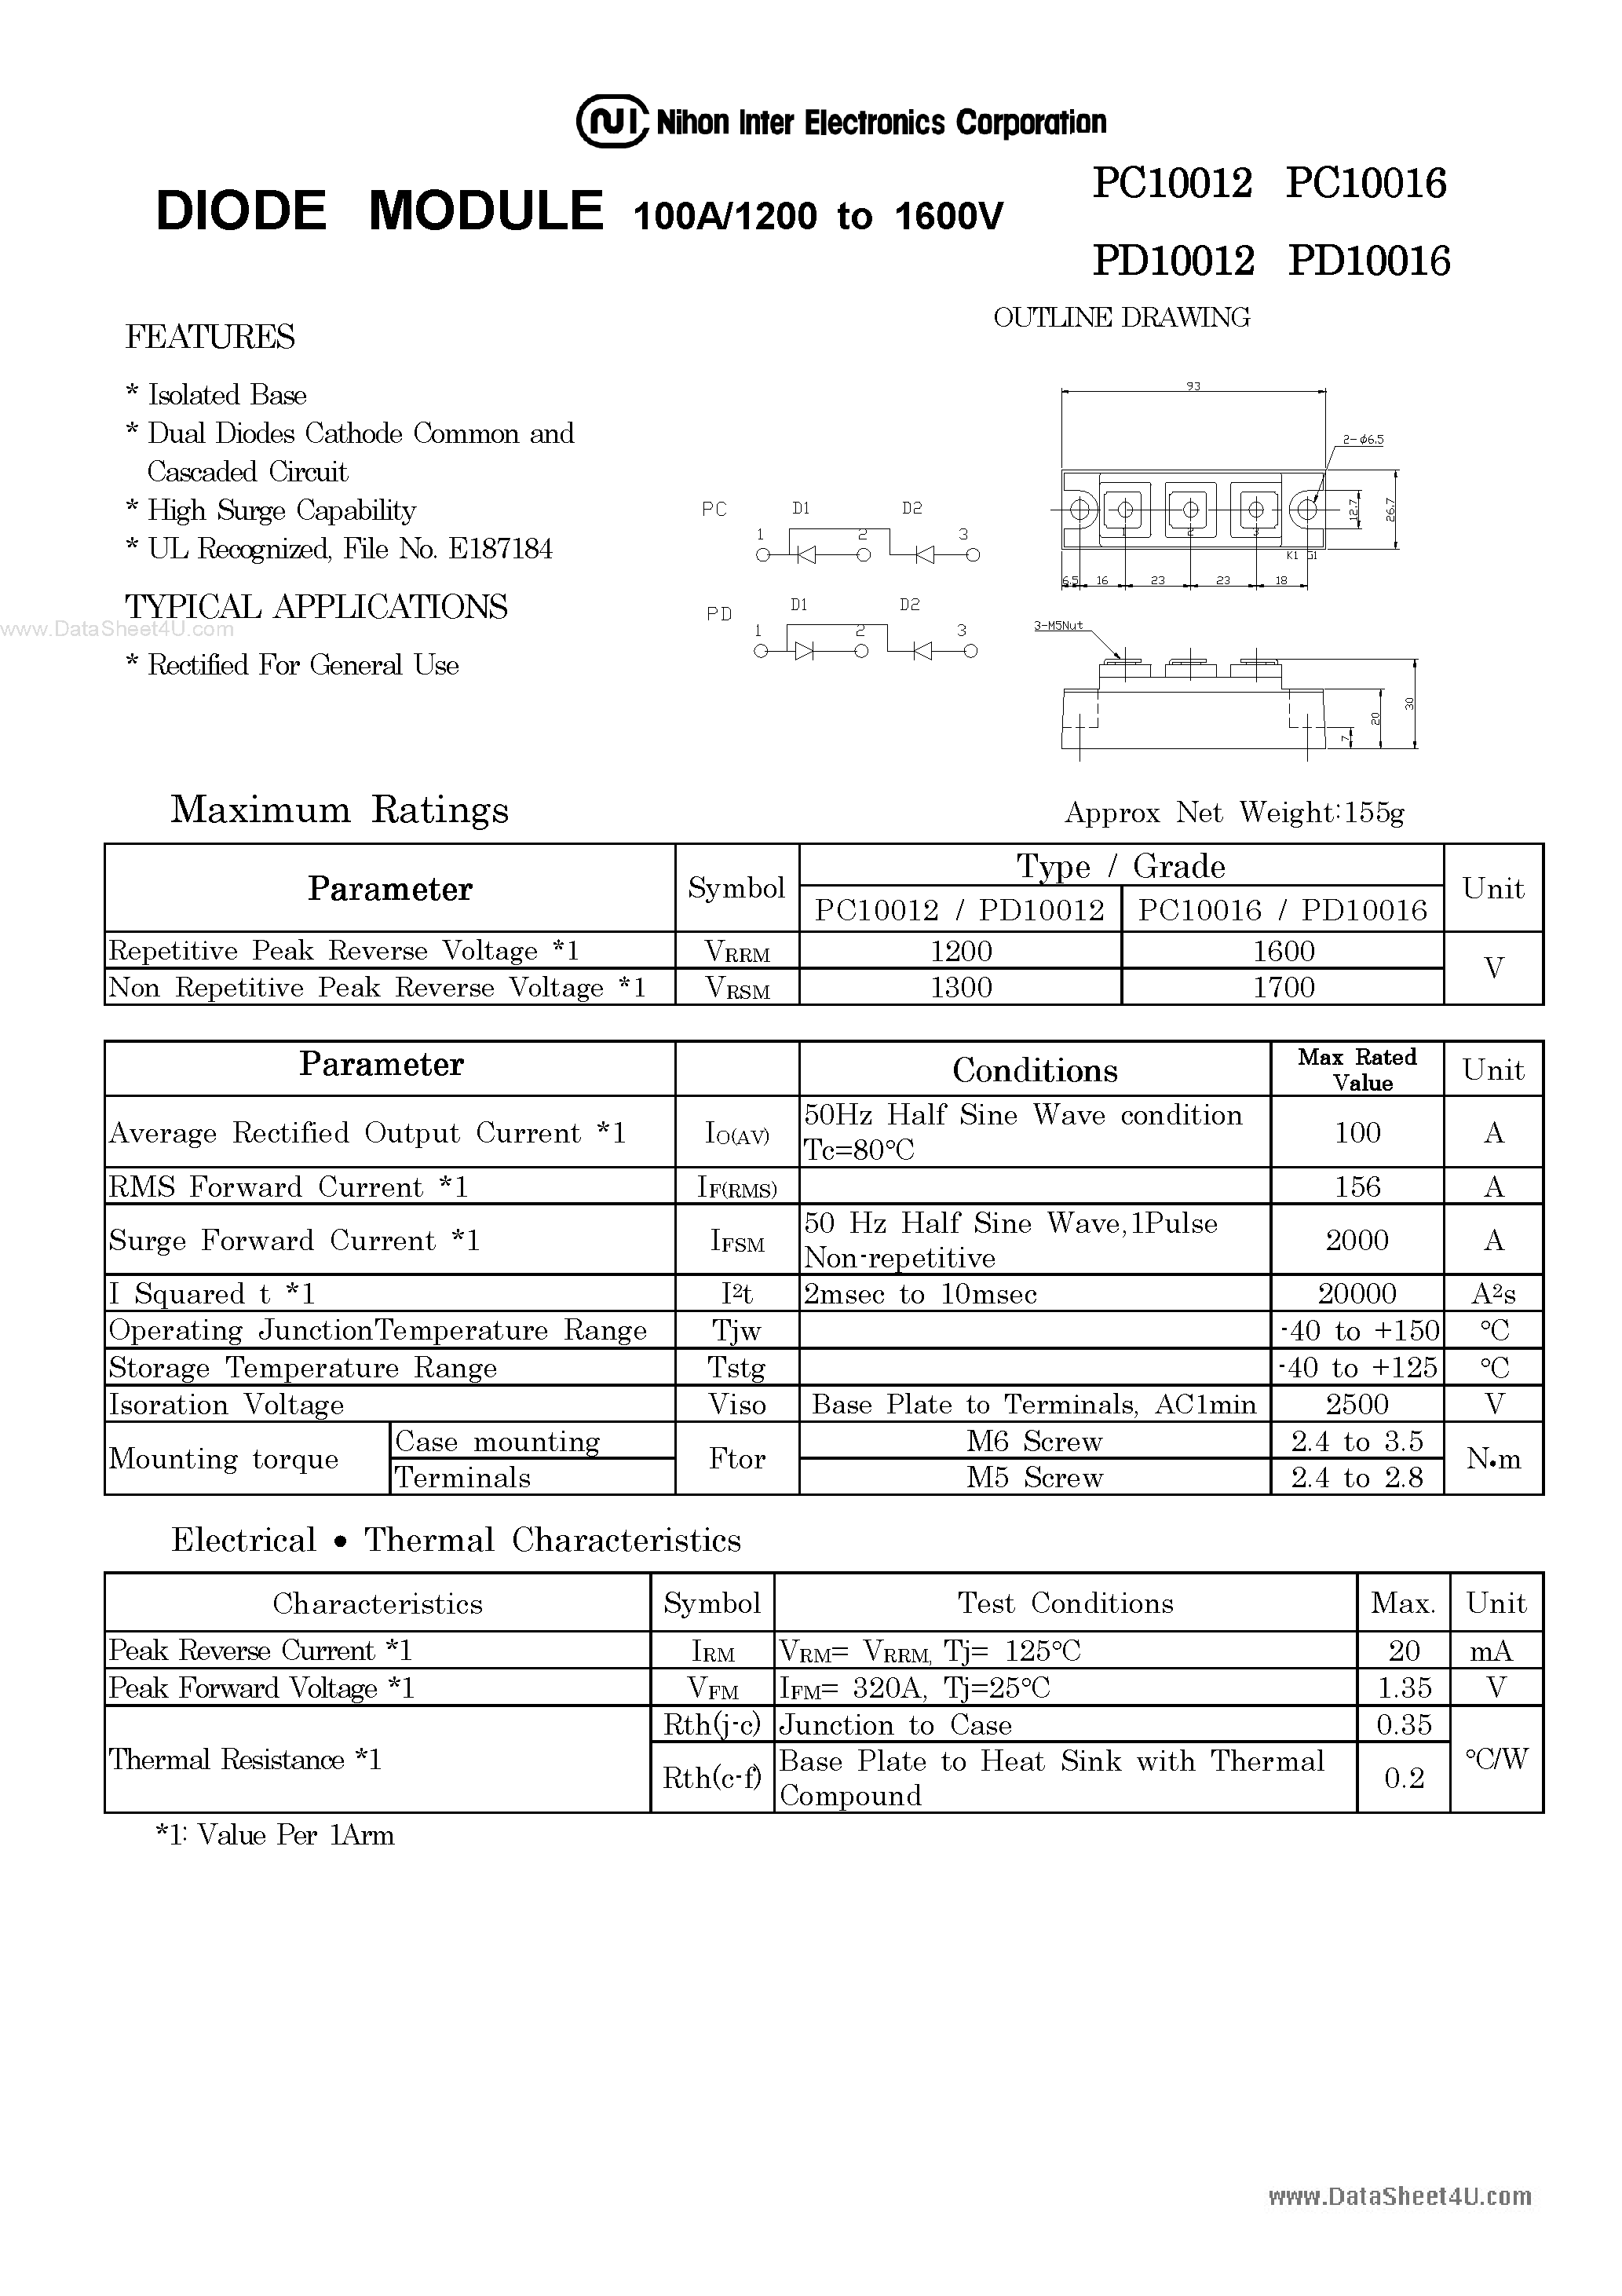 Datasheet PD10012 - (PD10012 / PD10016) DIODE MODULE page 1